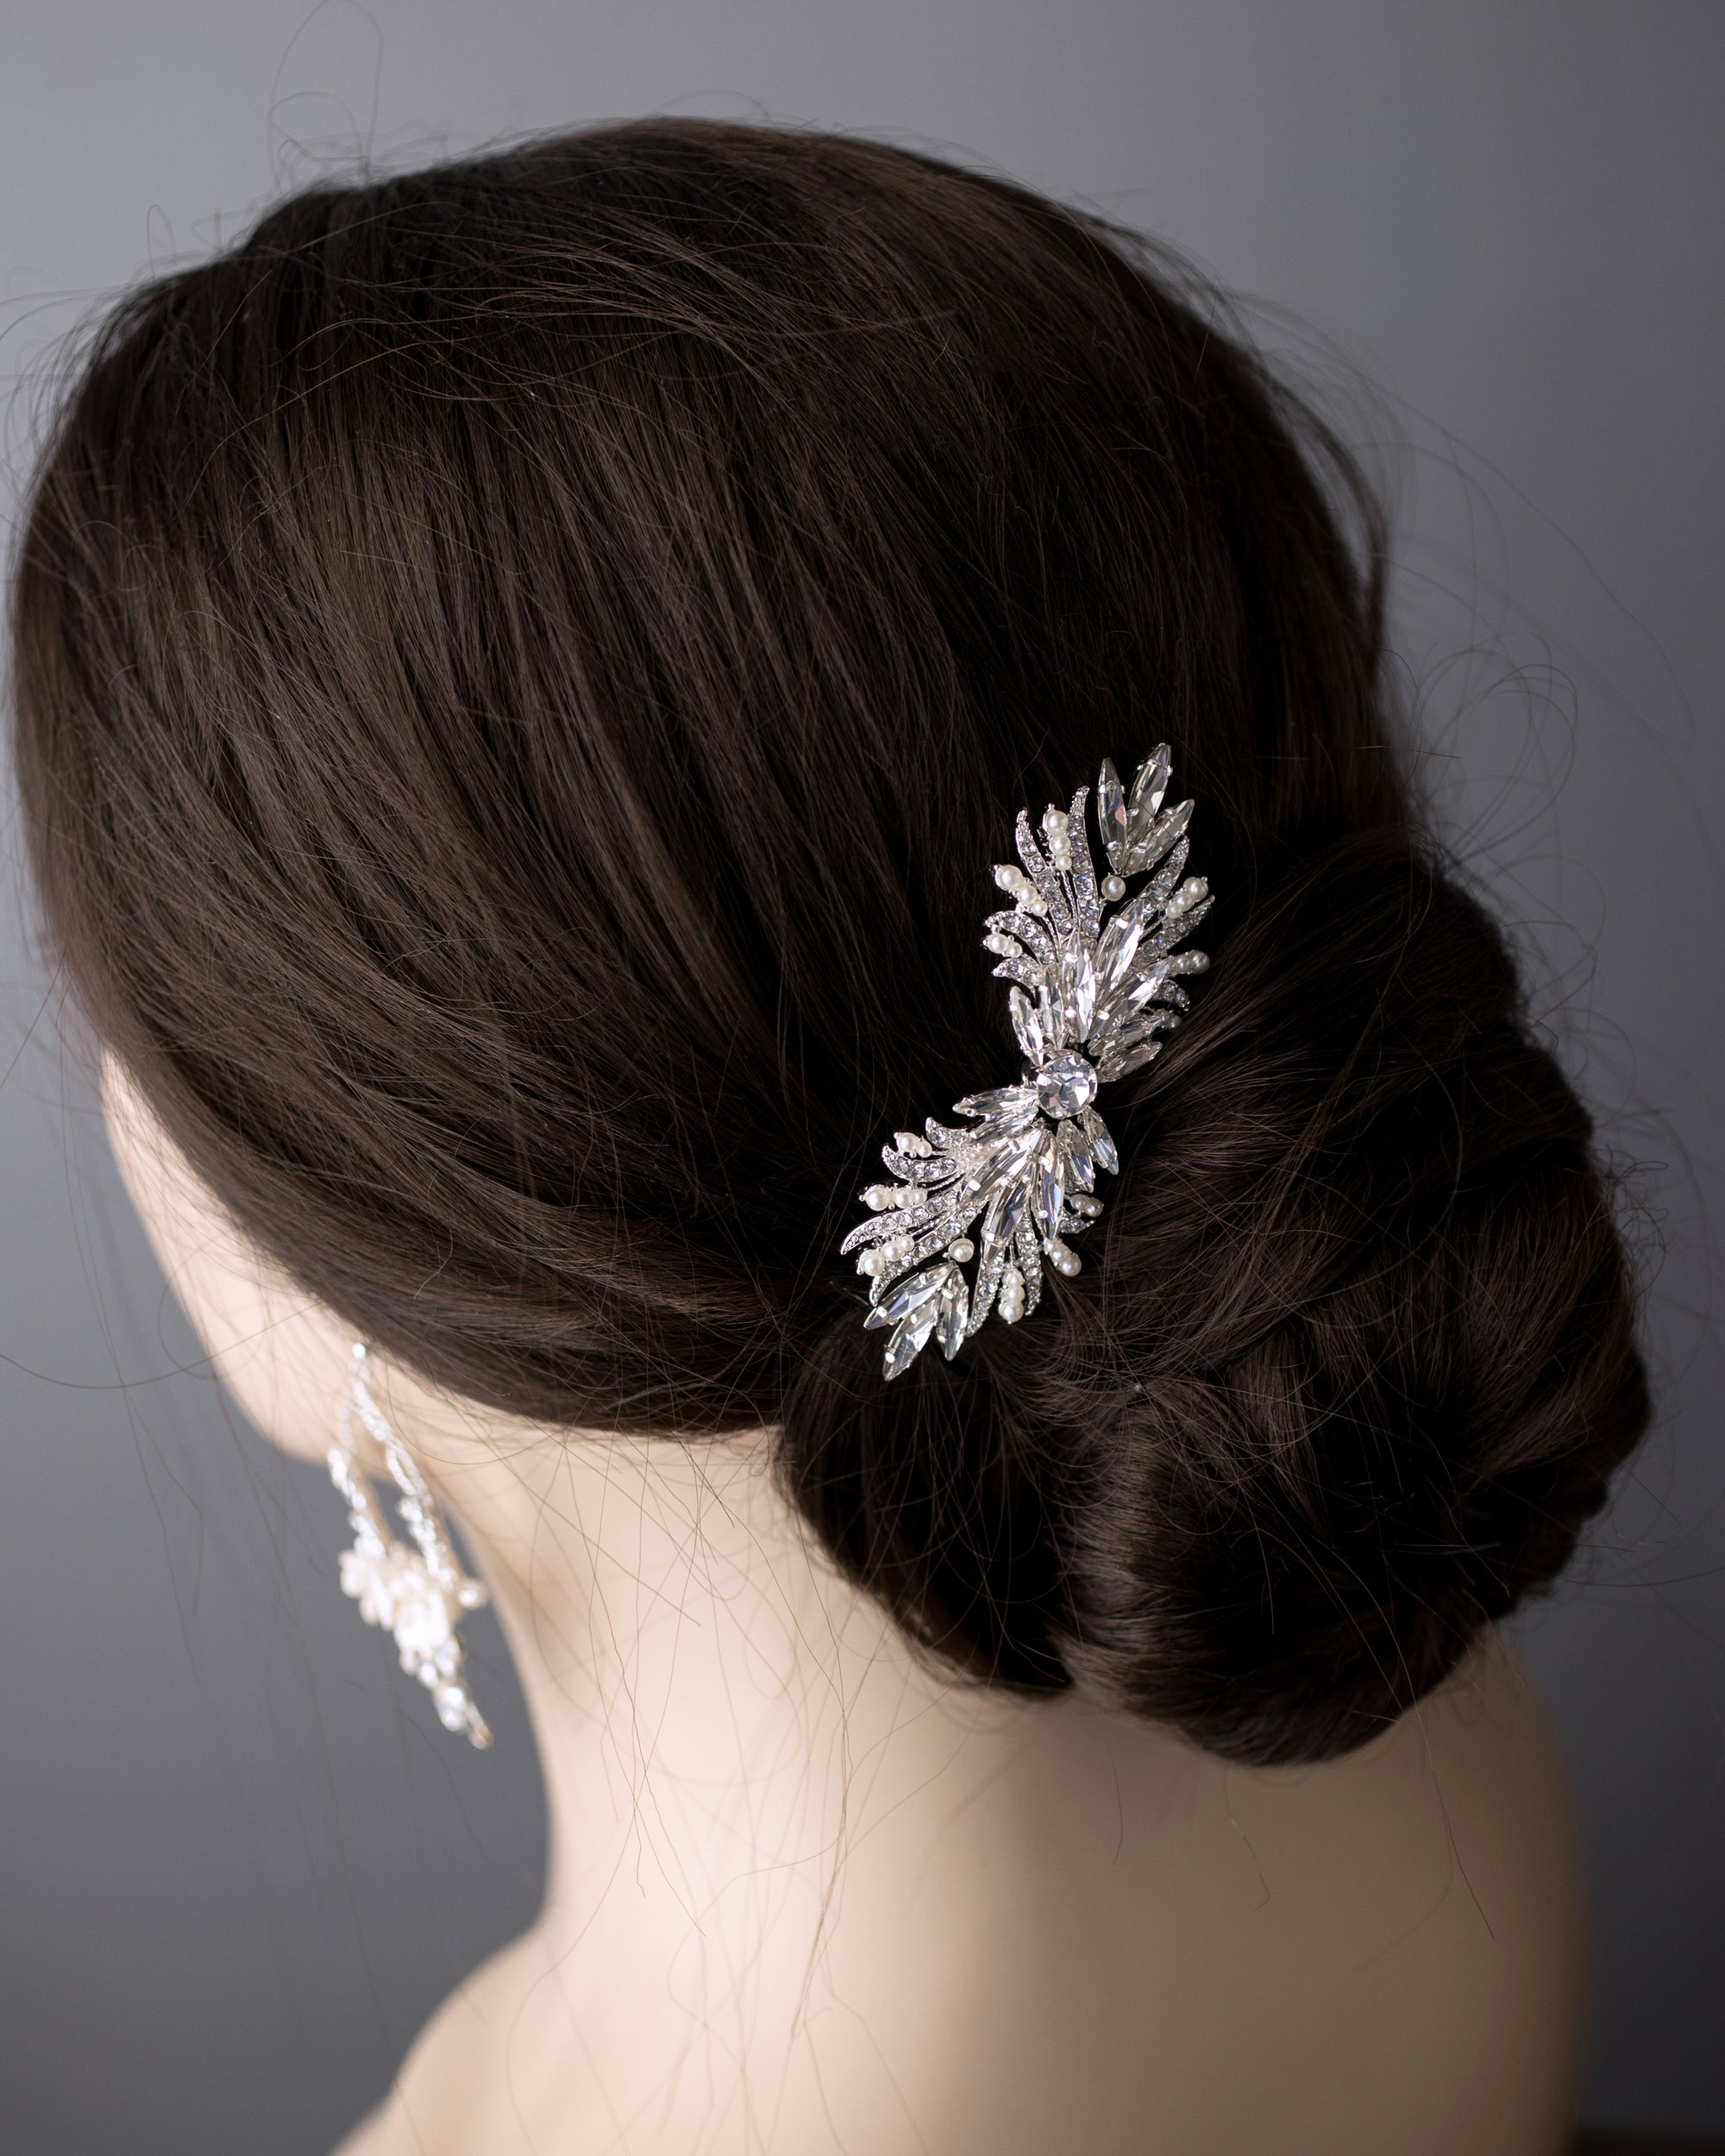 Vintage Hair Comb with Pearls - Cassandra Lynne